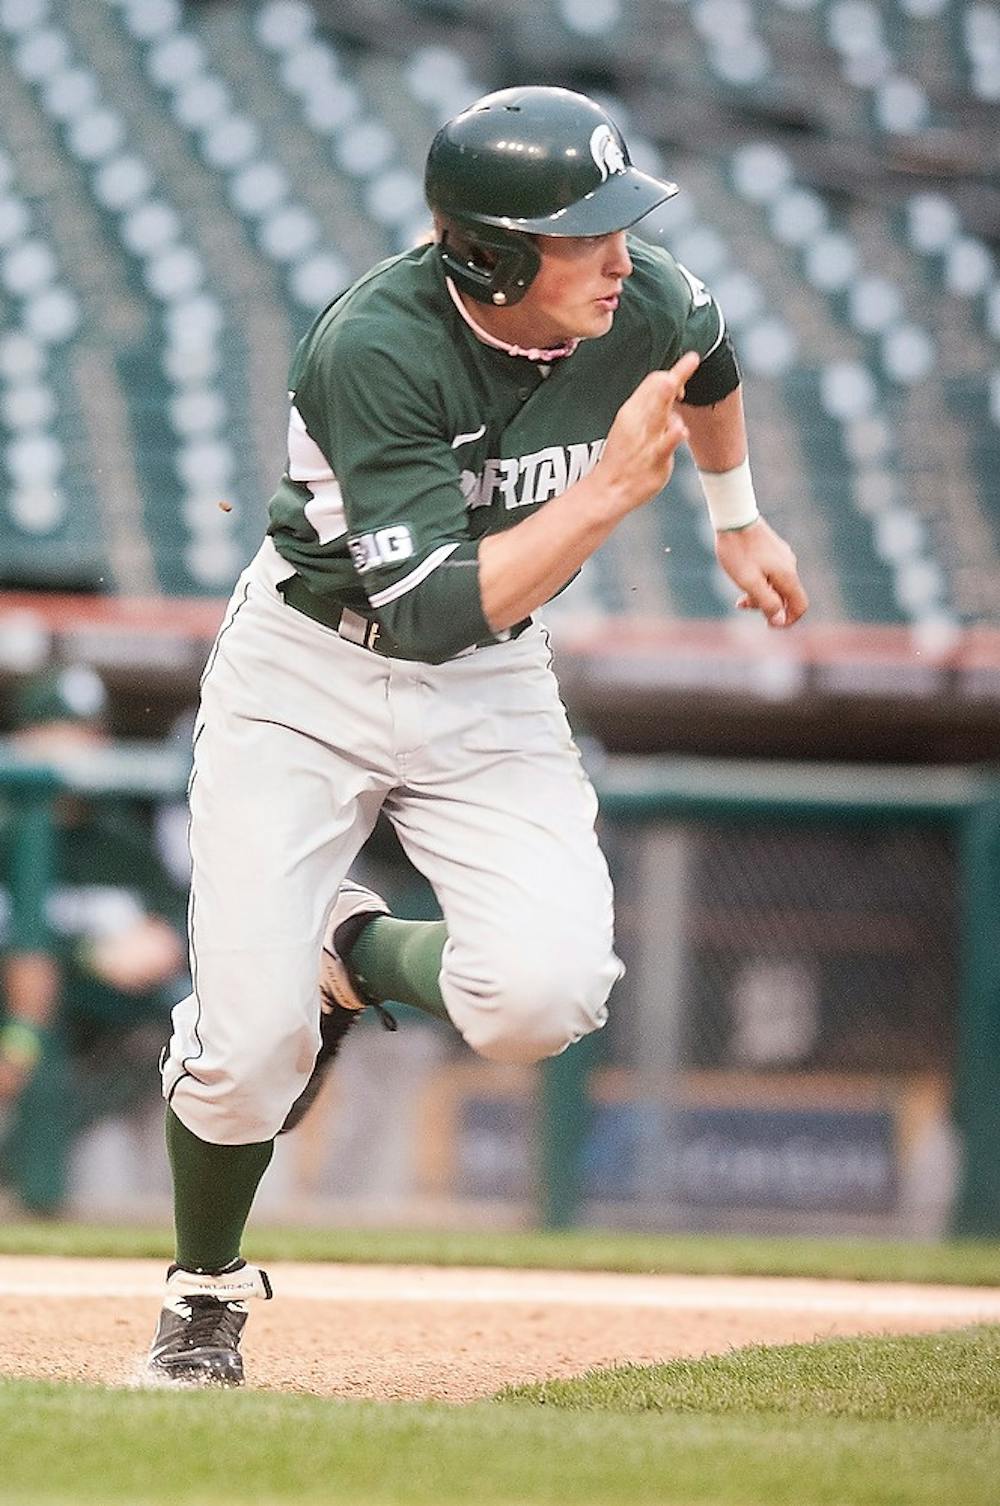 	<p>Freshman outfielder Cam Gibson runs from home plate after a hit Wednesday, April 17, 2013, at Comerica Park. <span class="caps">MSU</span> is beating Central Michigan in the middle of the fifth inning 1-0, with the remainder of the game set to be played May 14 in Mt. Pleasant. Danyelle Morrow/The State News</p>